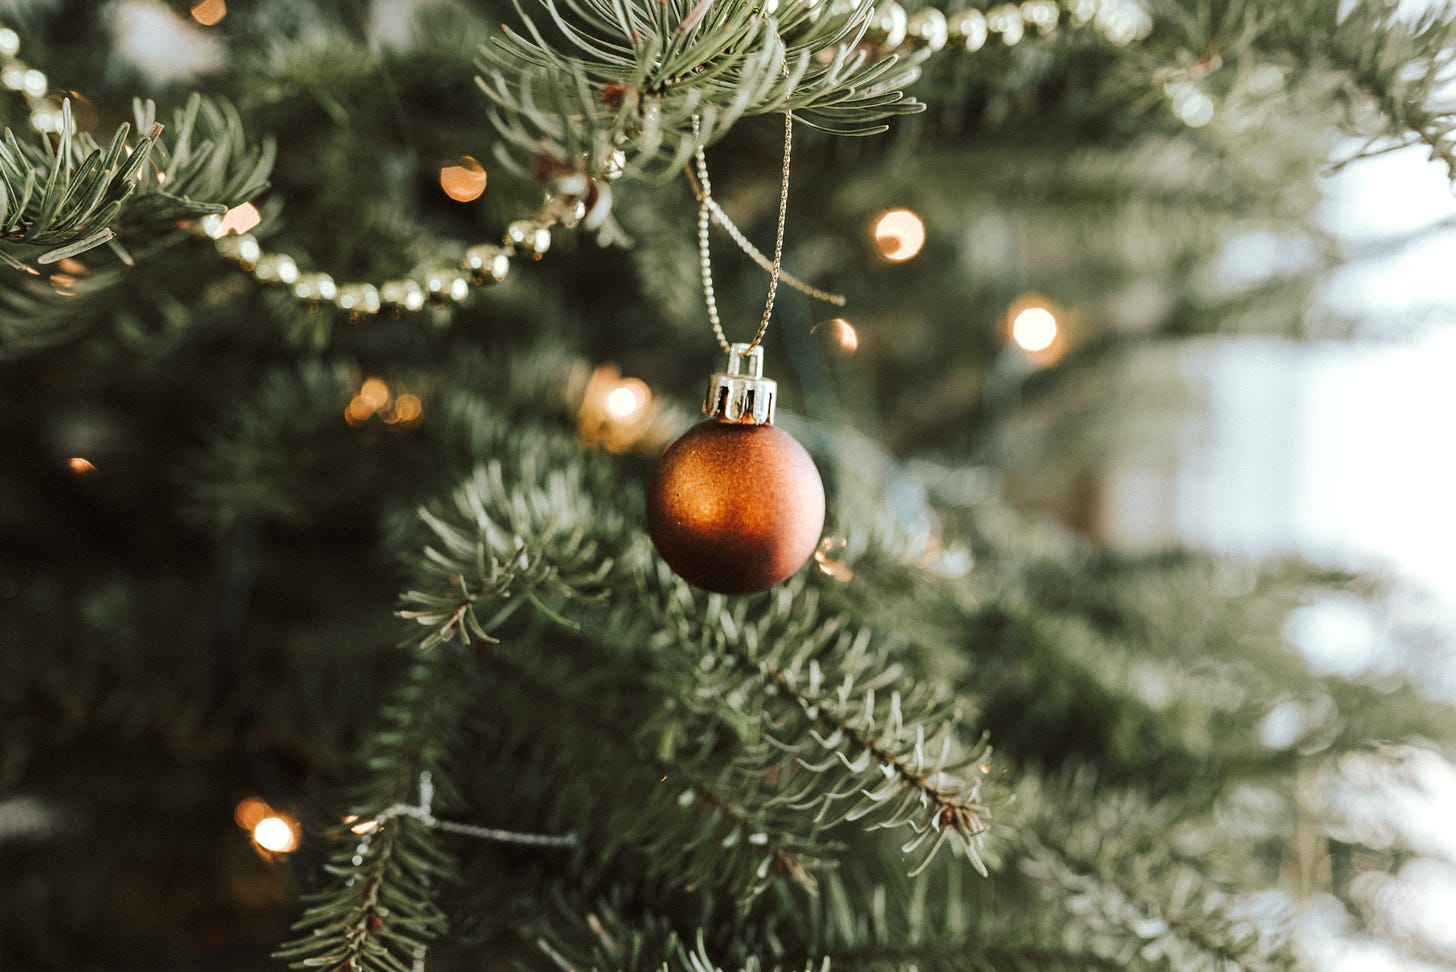 A photo of a bauble on a Christmas tree